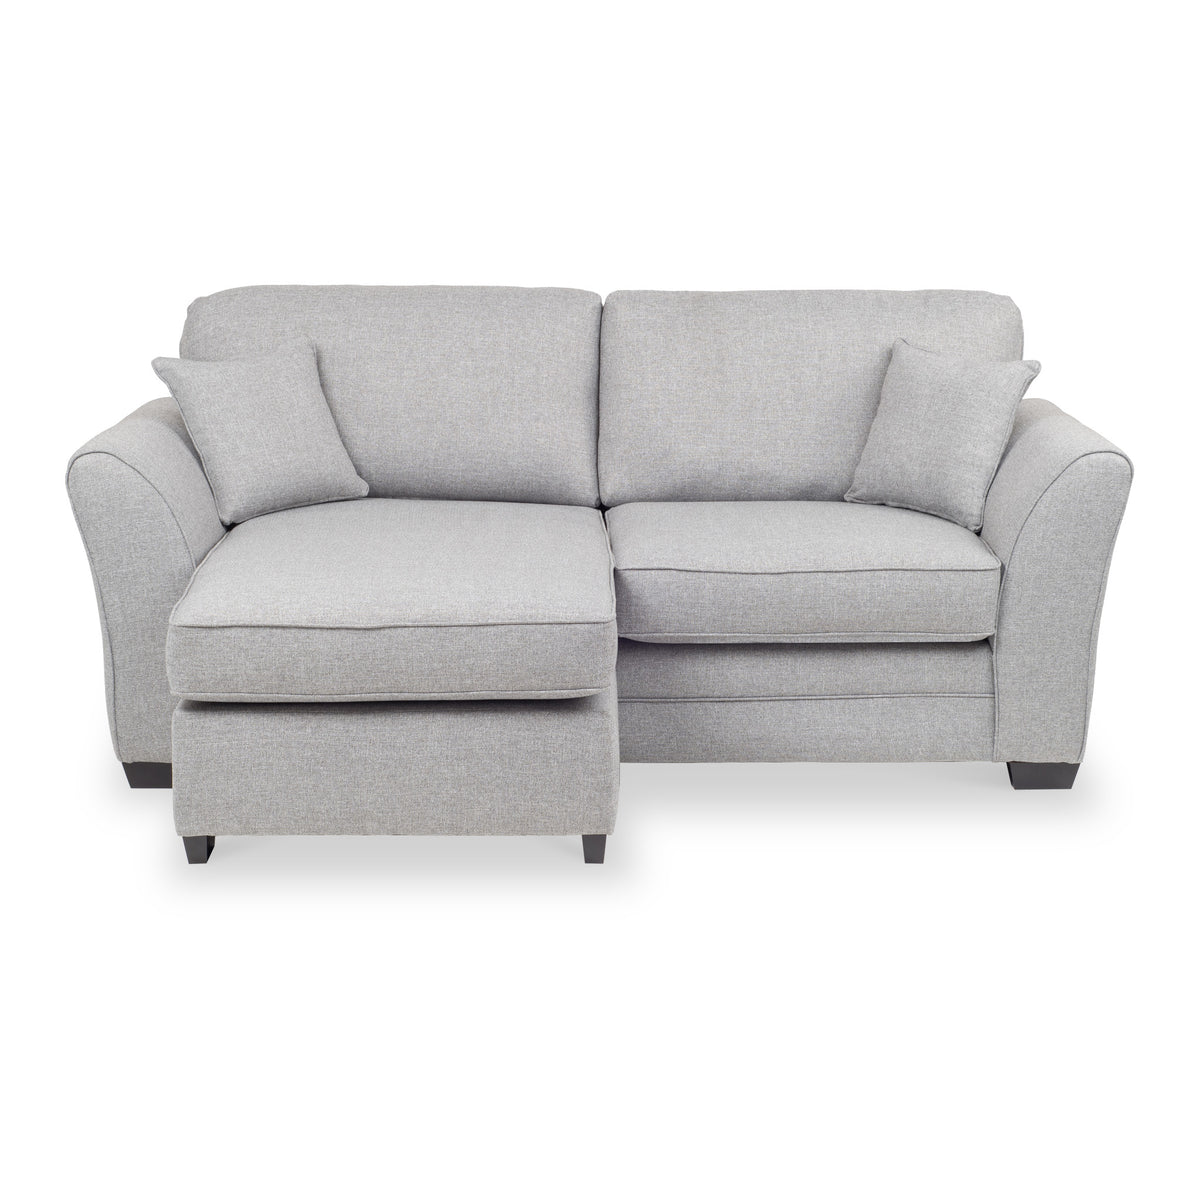 St Ives Chaise Sofa in Silver by Roseland Furniture